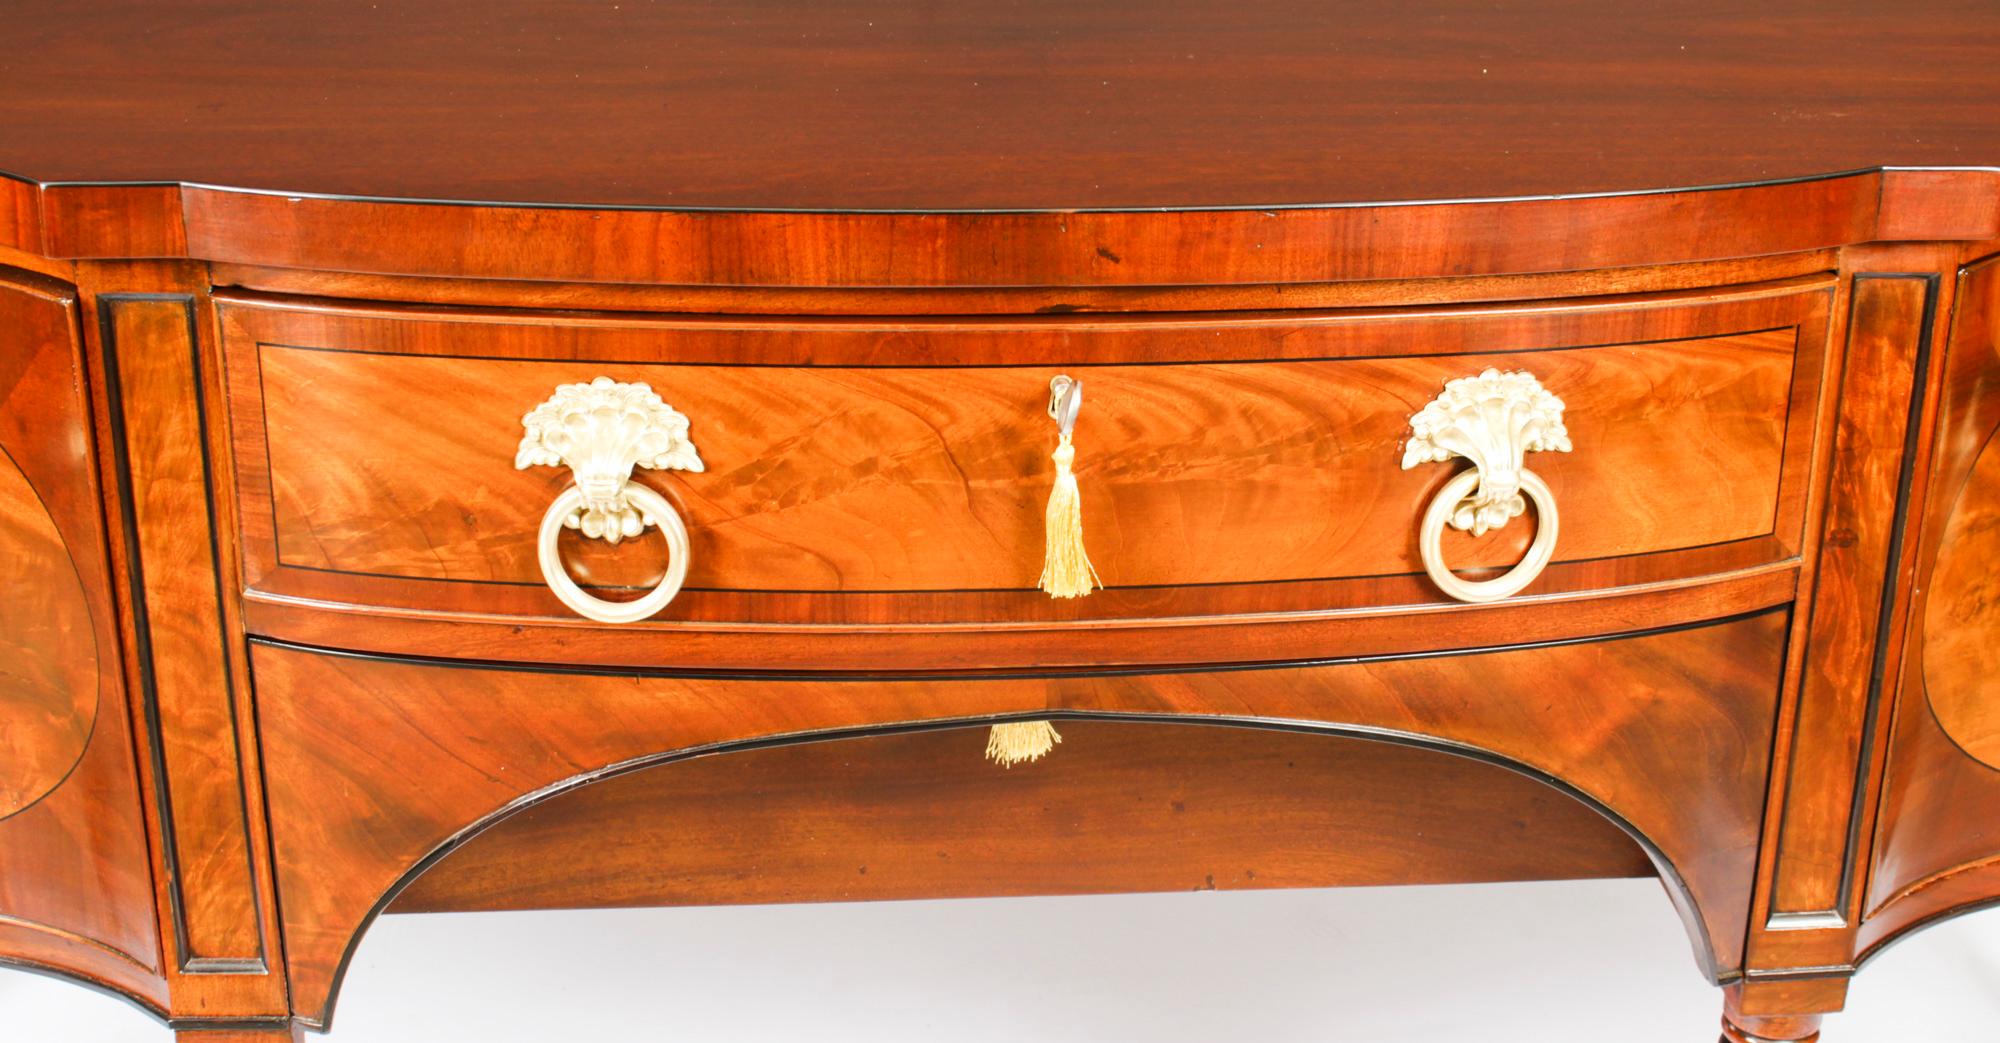 Antique English Regency Flame Mahogany Sideboard 19th Century For Sale 3